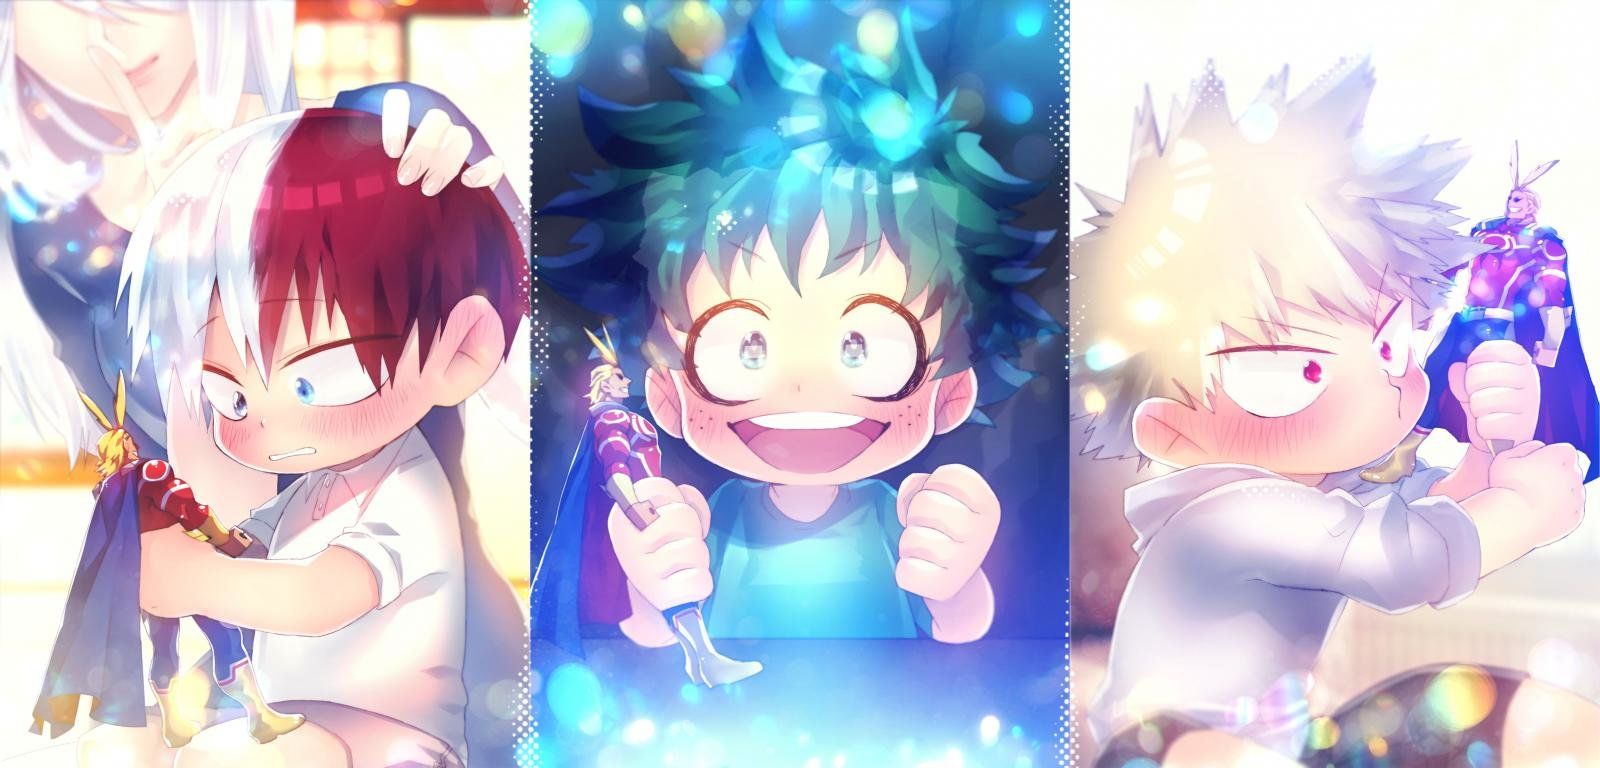 Cute Bnha PC Wallpapers on WallpaperDog